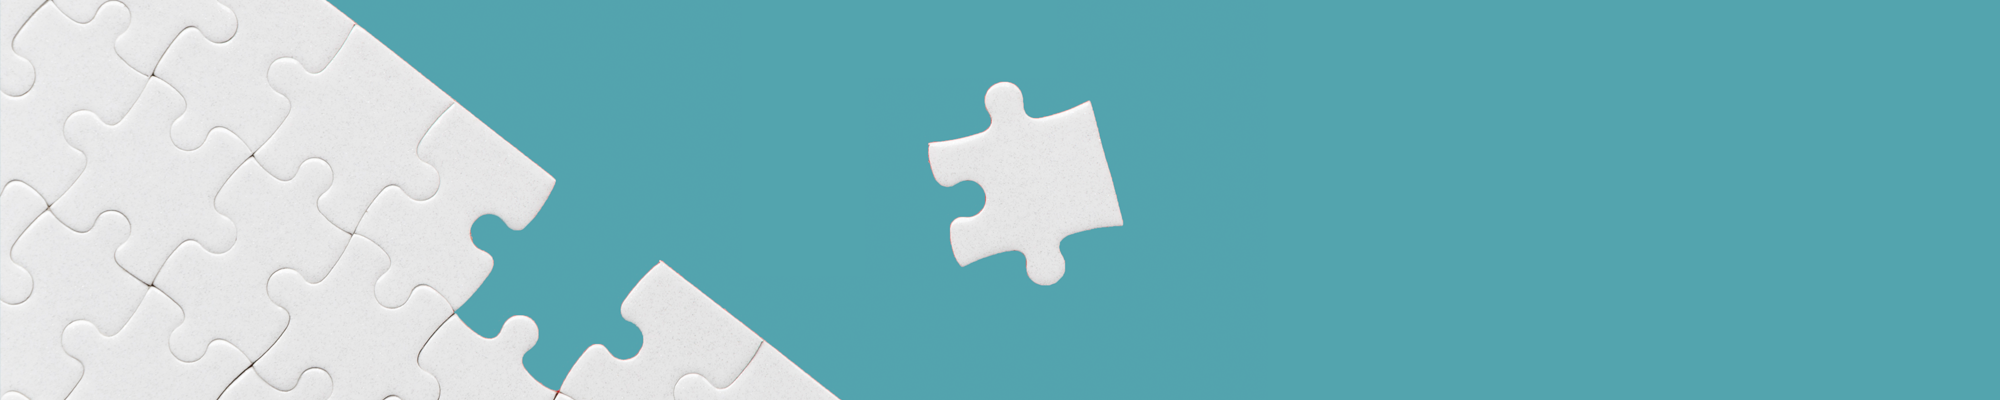 Internal communications after a crisis: Supporting your team with interim hires - Blue jigsaw puzzles fitting together - VMAGROUP